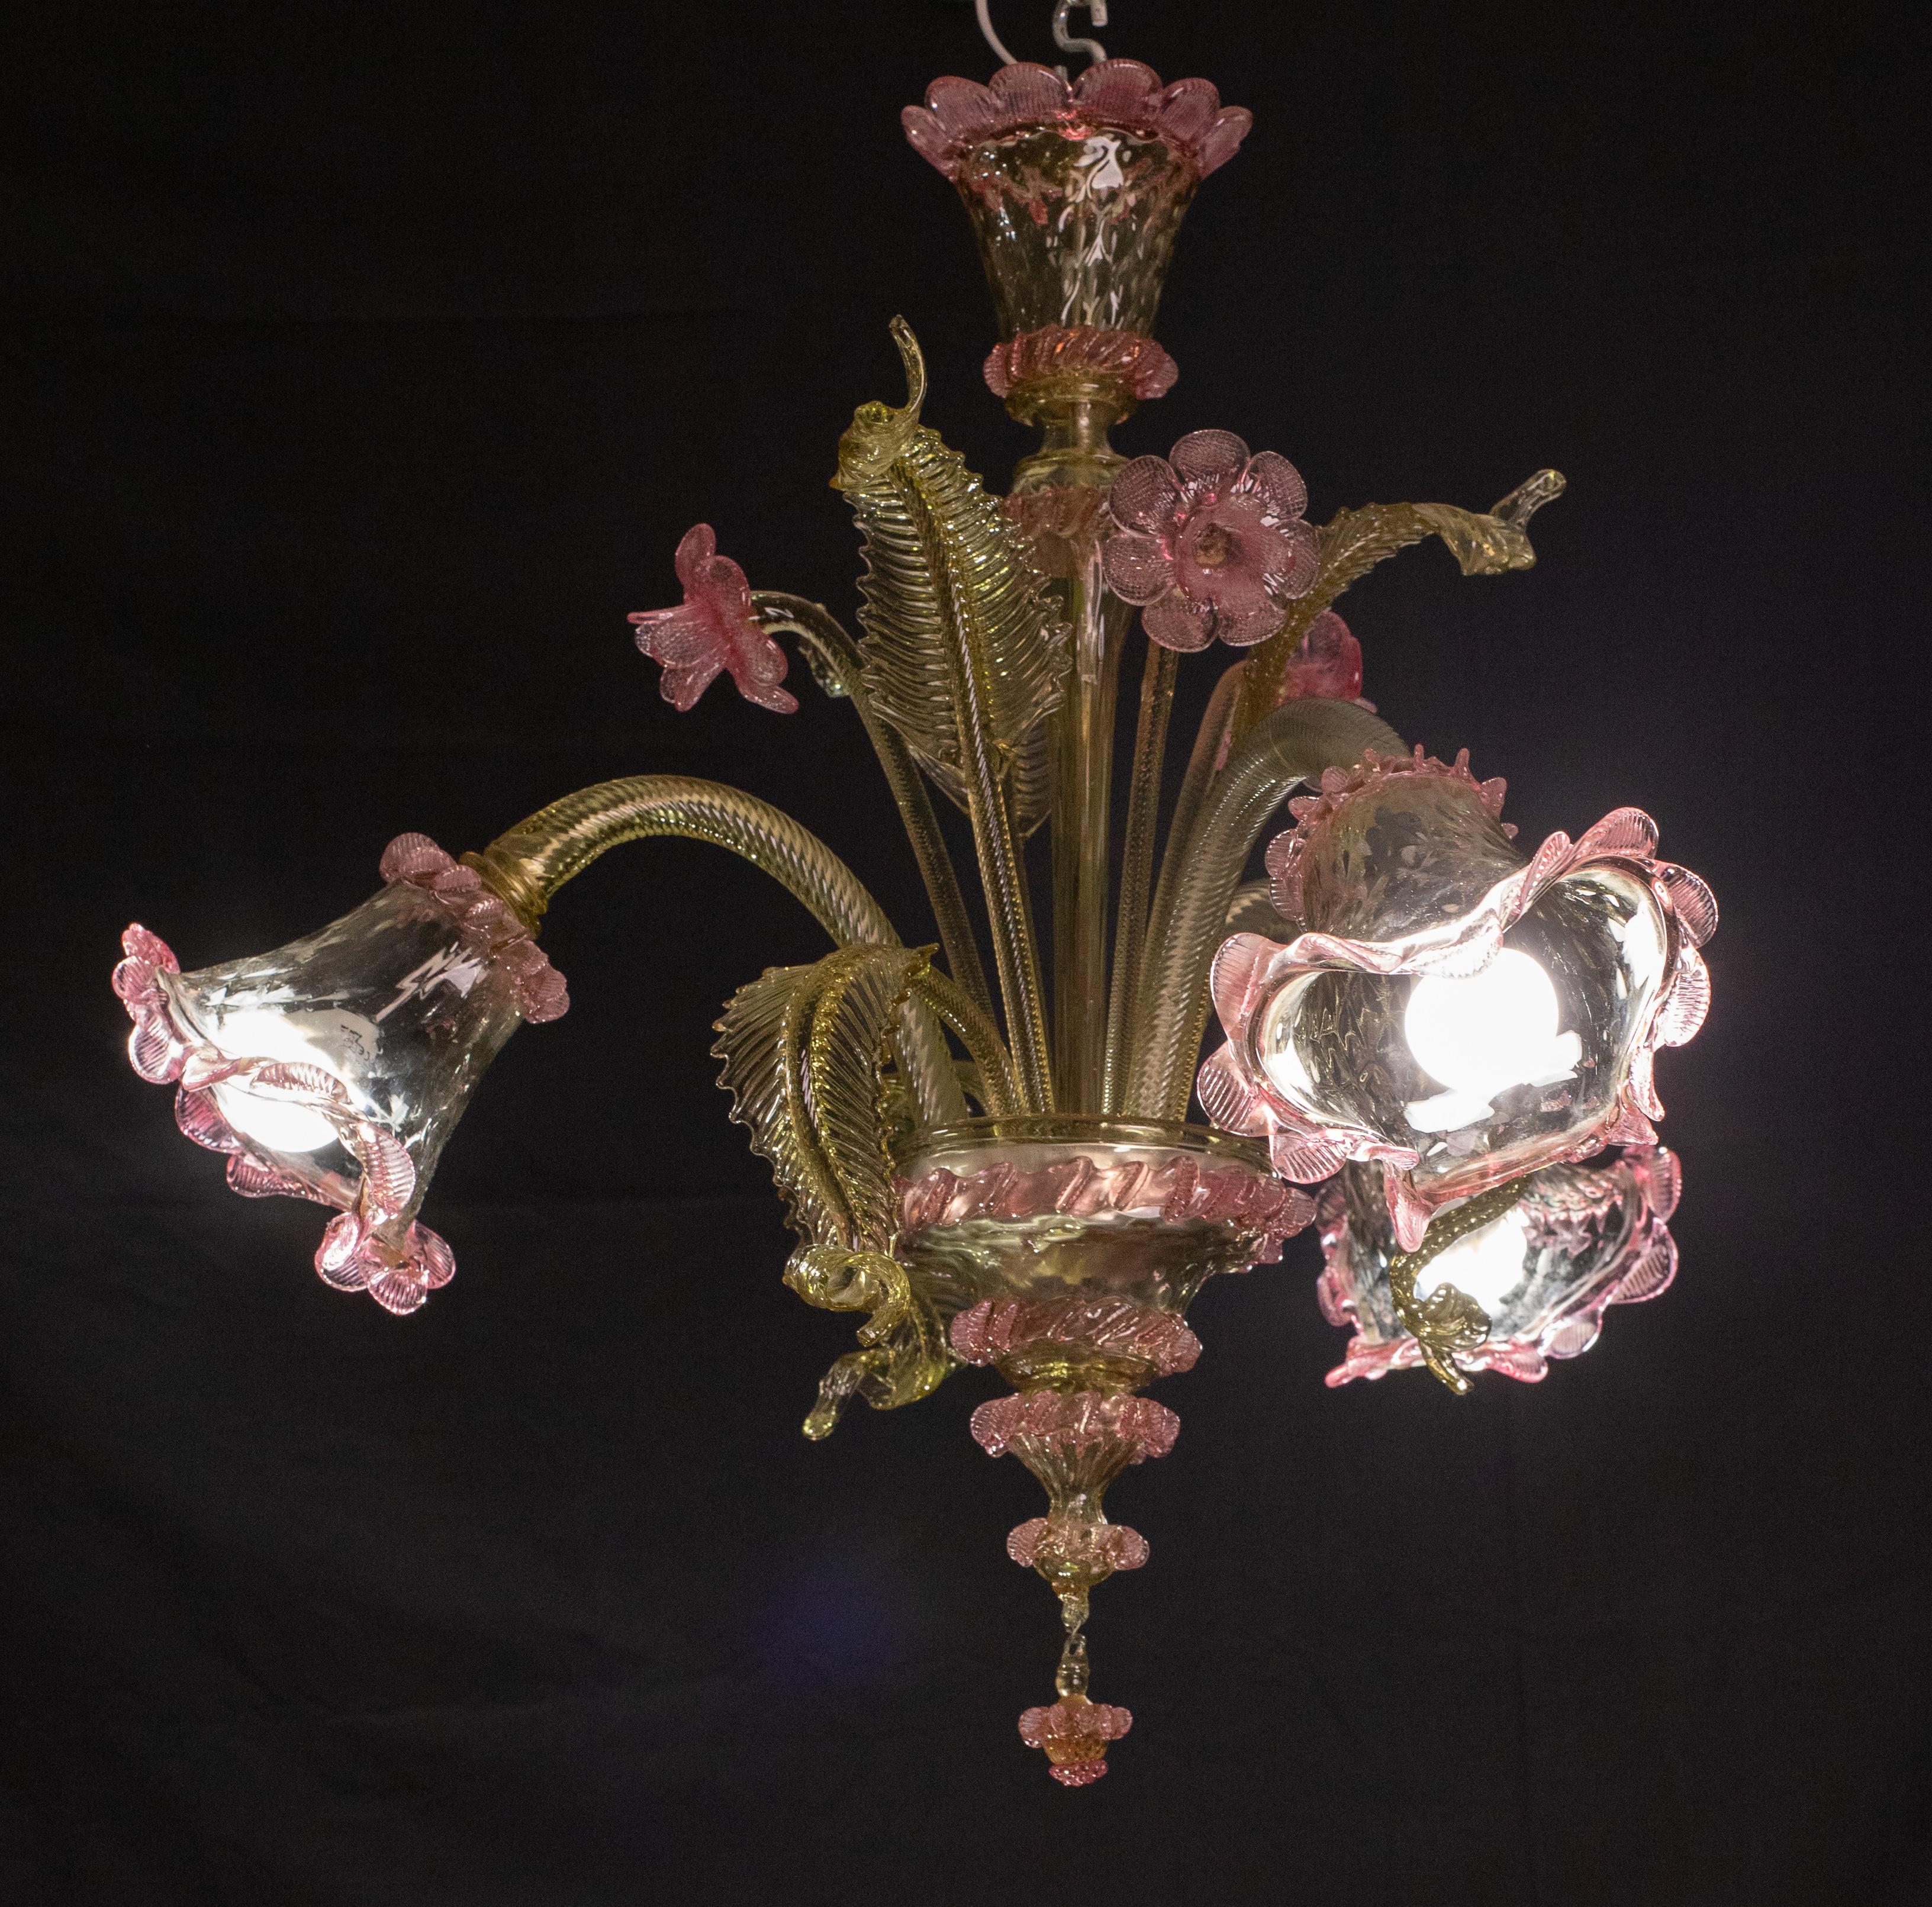 Pretty Murano chandelier, typical classic Venetian chandelier.

The chandelier has 3 arms that mount 3 e14 light points, European standards, possible to rewire for Usa.

The fixture is full of leaves and flowers, 3 high leaves, 3 low leaves and 3